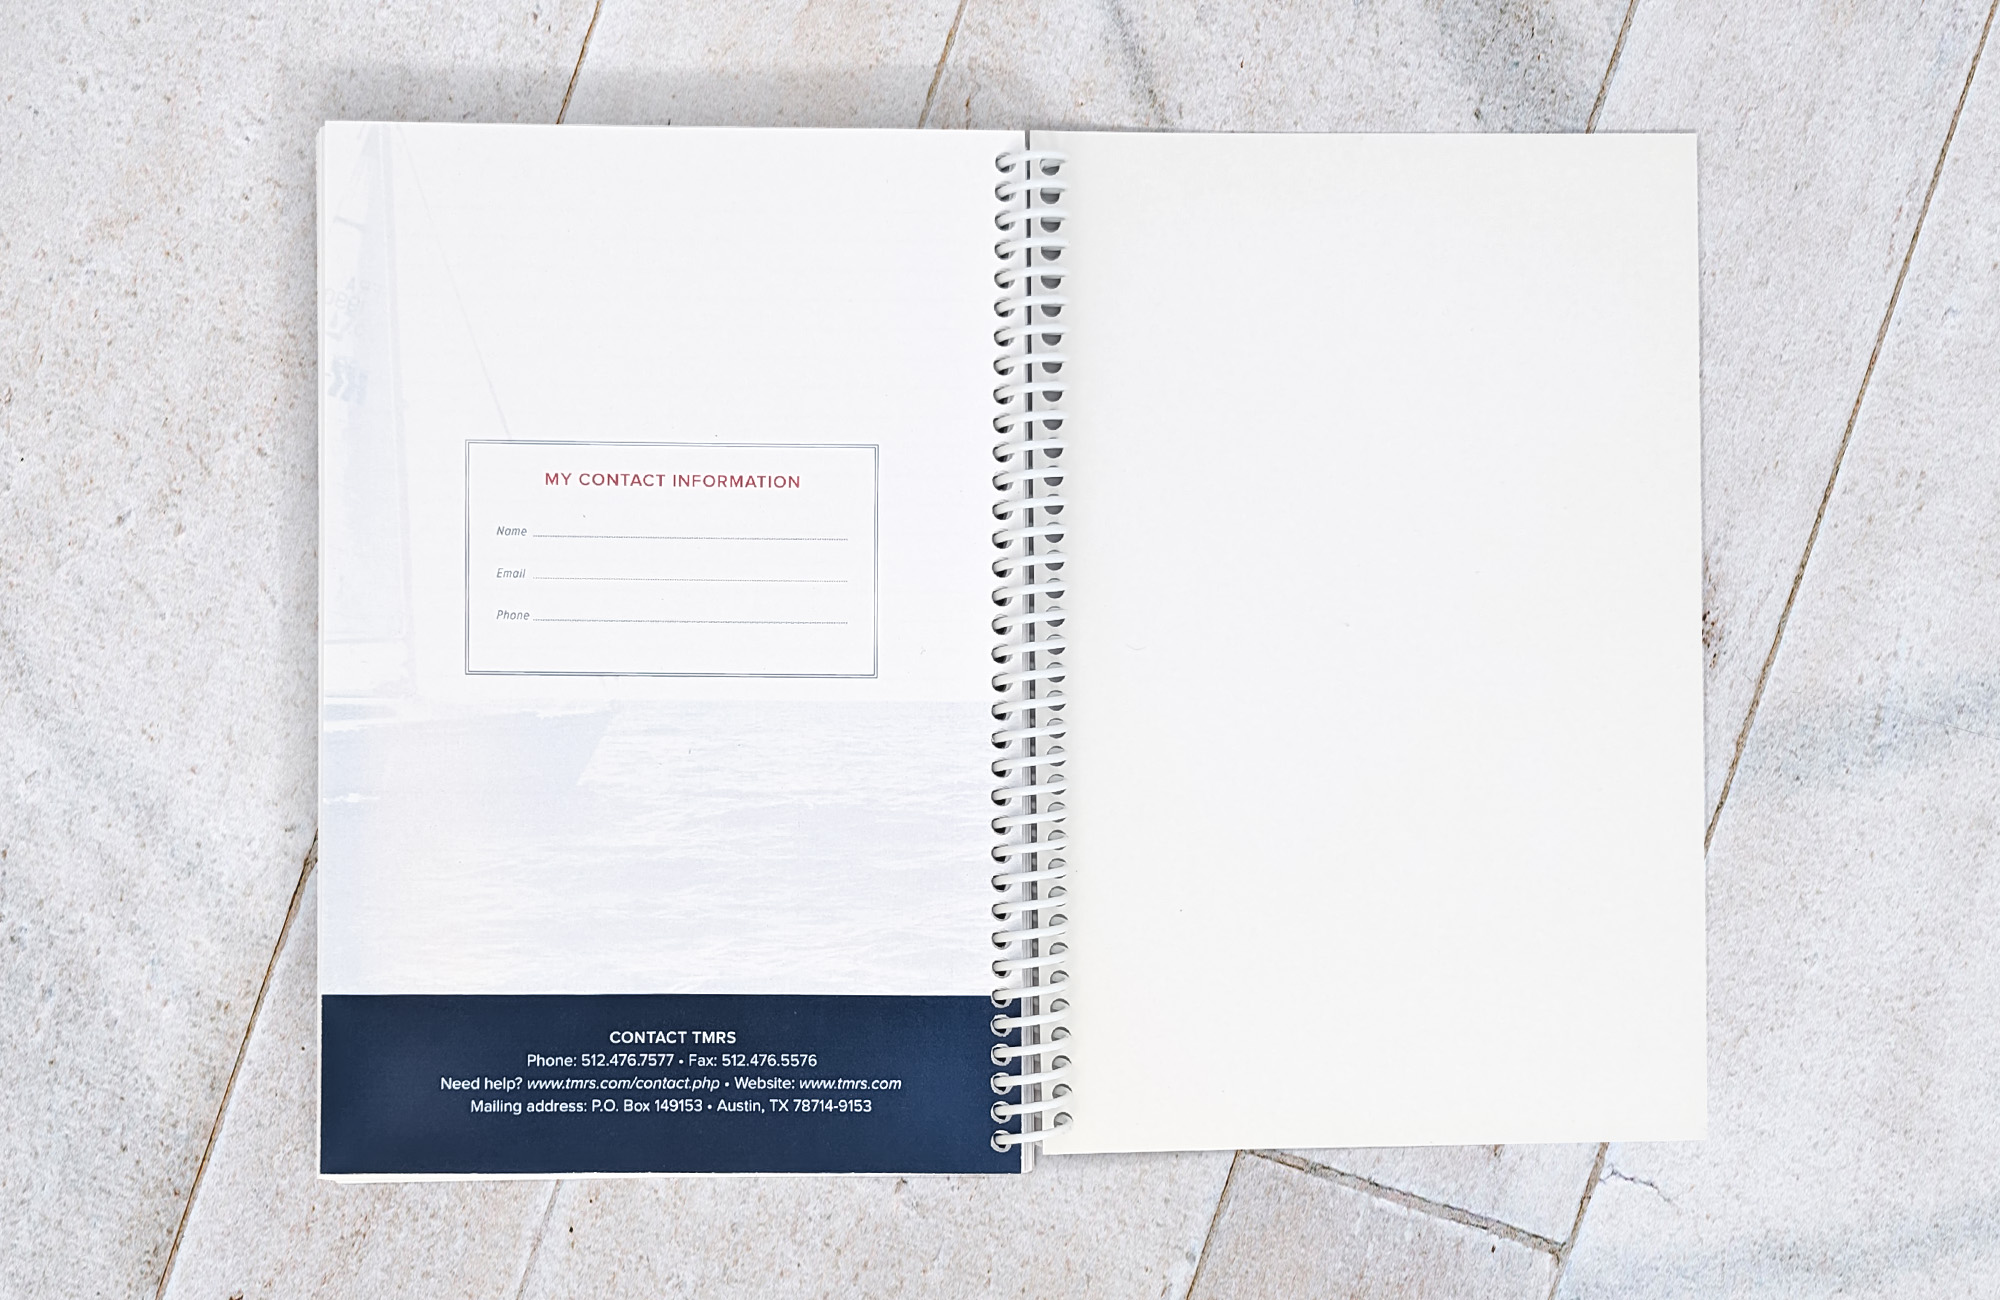 A coil-bound planner opened up to a page for personal contact information. There is a screened back image of a sailboat on the water in the background.